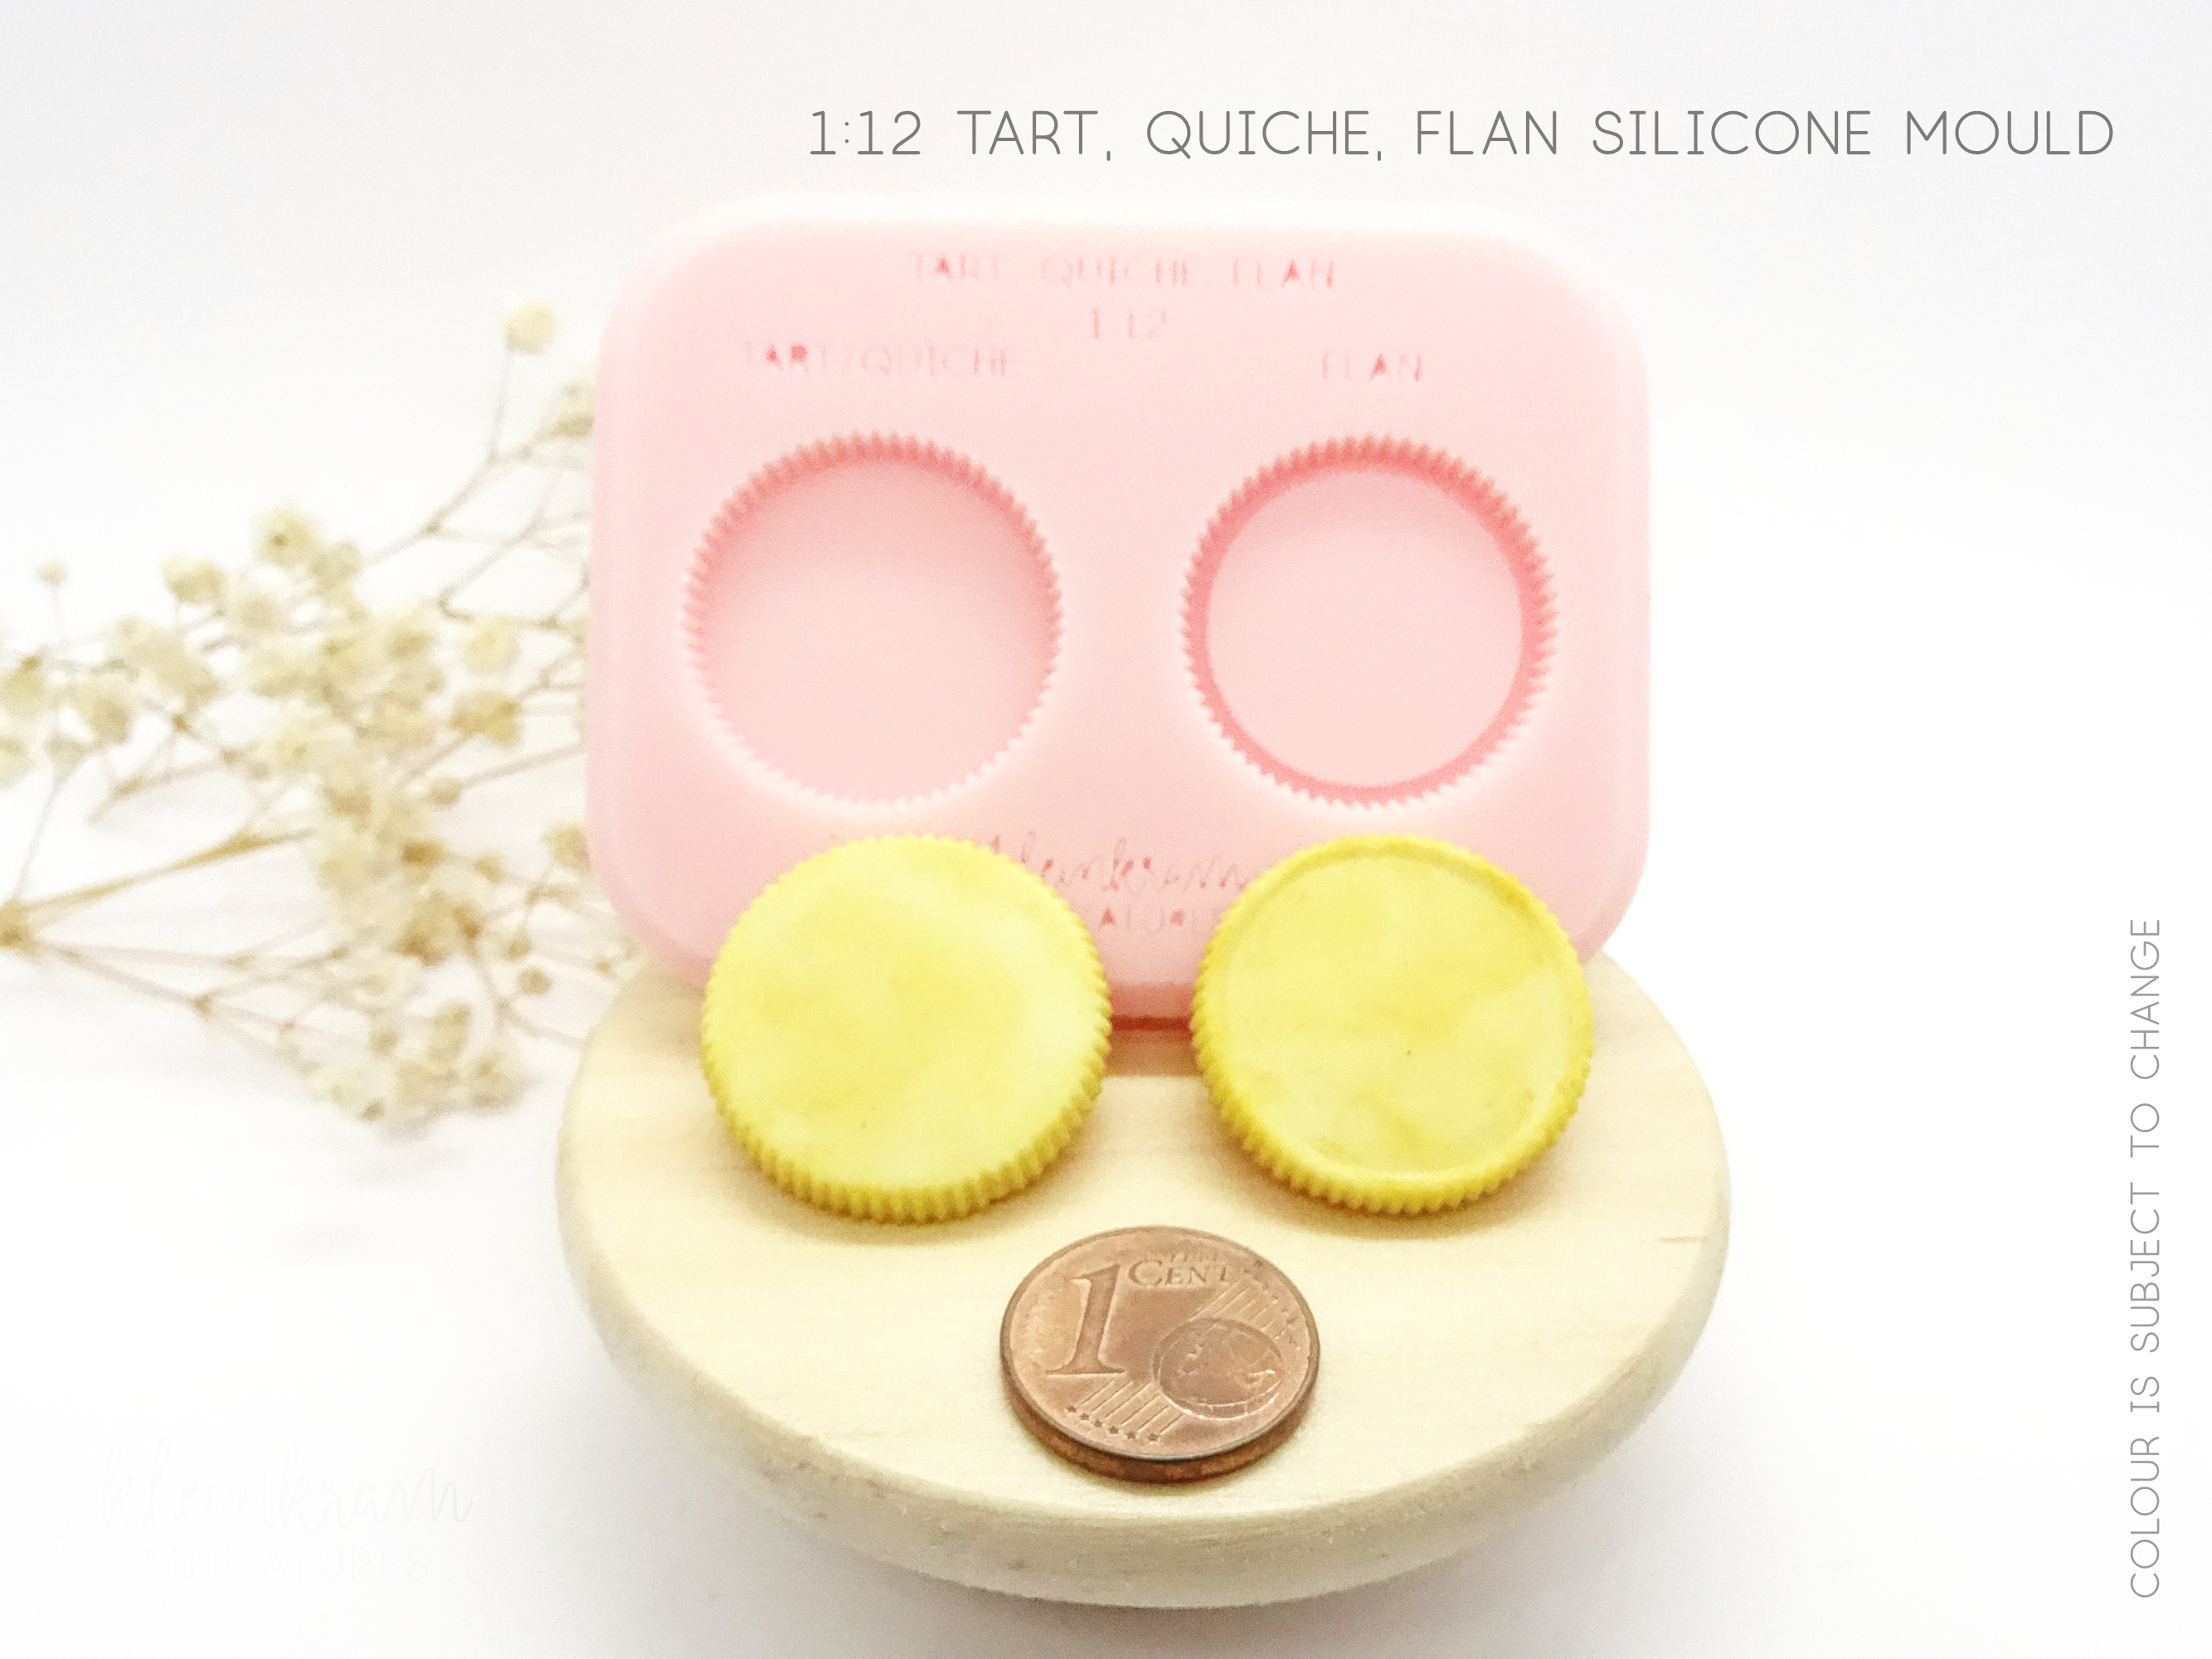 Tart, Quiche, Flan - 1:12 Silicone Mould